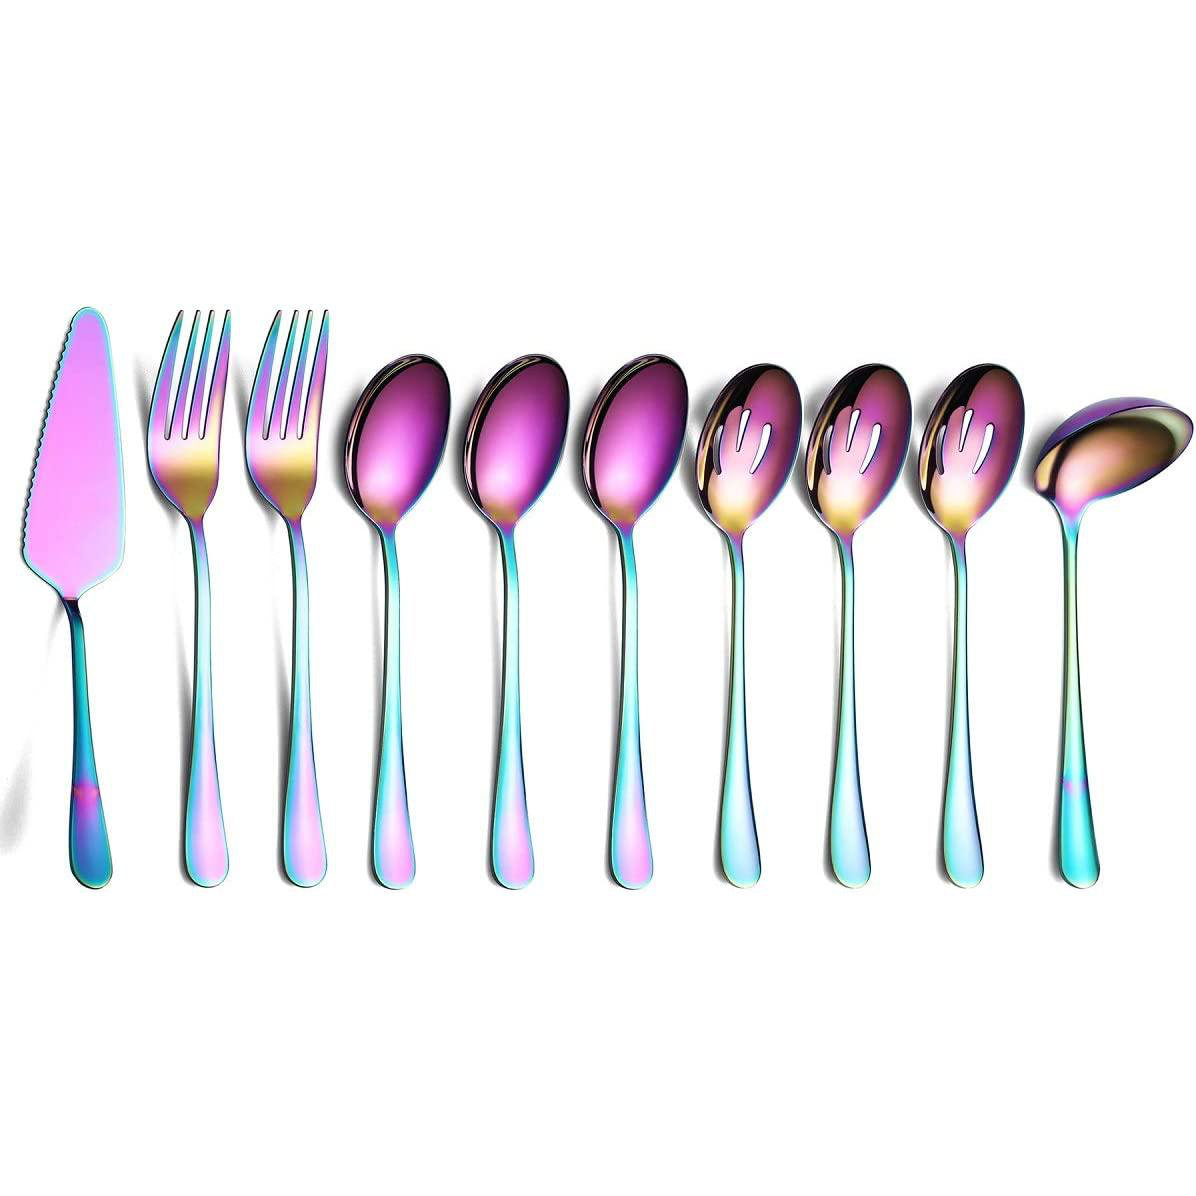 5,014 Cake Slice Utensil Royalty-Free Photos and Stock Images | Shutterstock